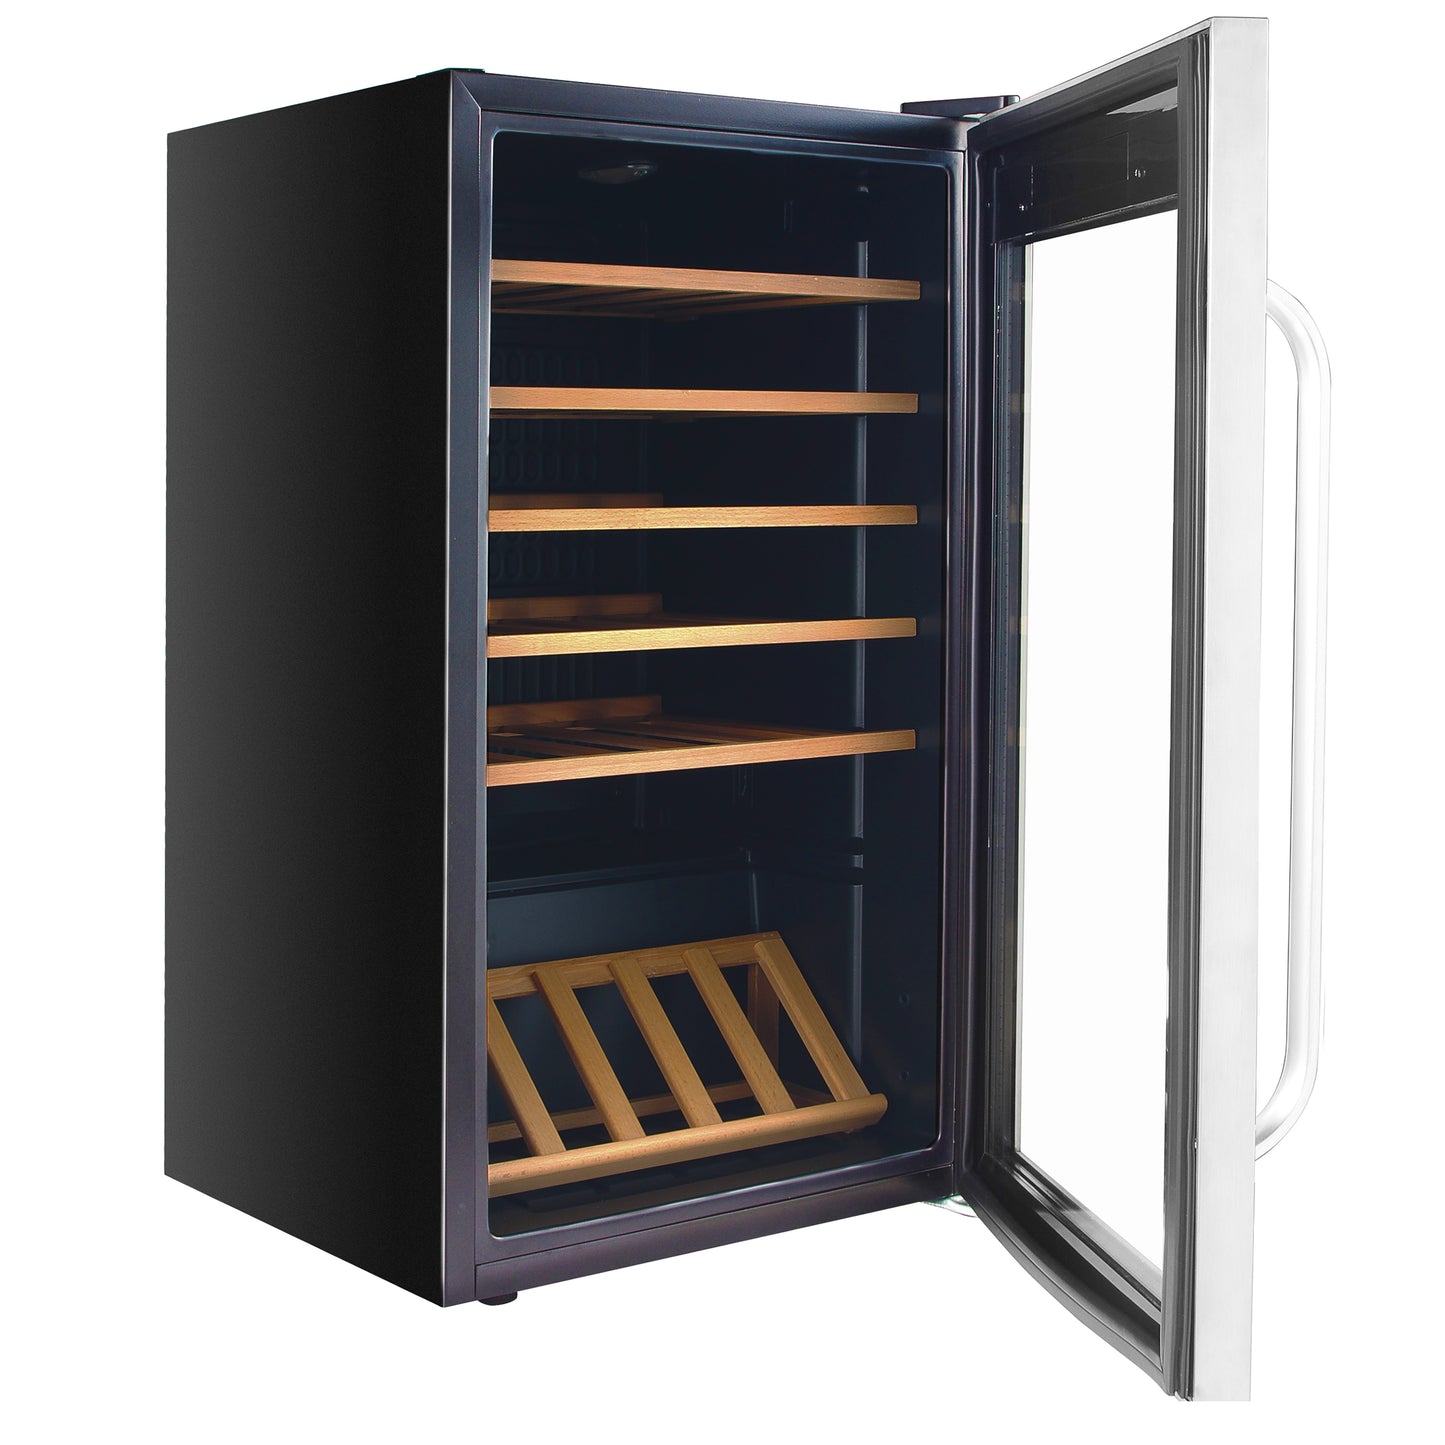 A black stainless steel wine fridge with glass door and LED lights, showcasing 166 standard 750ml wine bottles on adjustable shelves and a wire display rack.